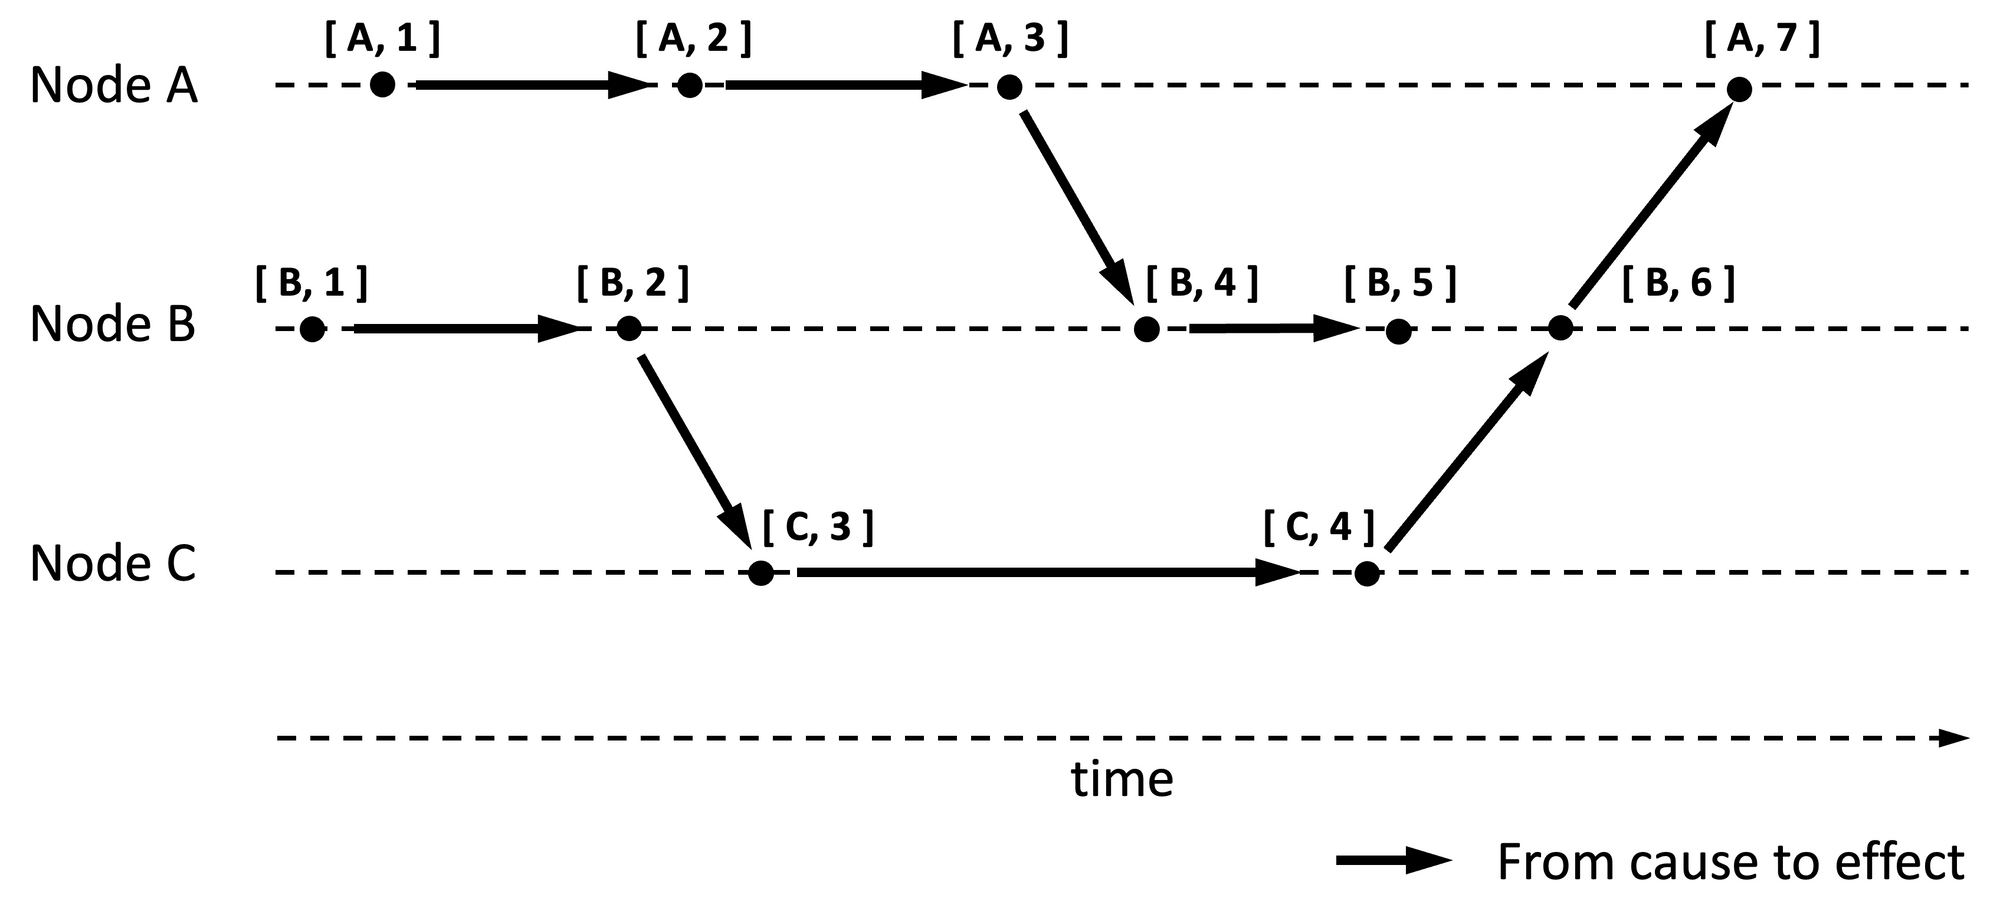 Clocks and Causality - Ordering Events in Distributed Systems